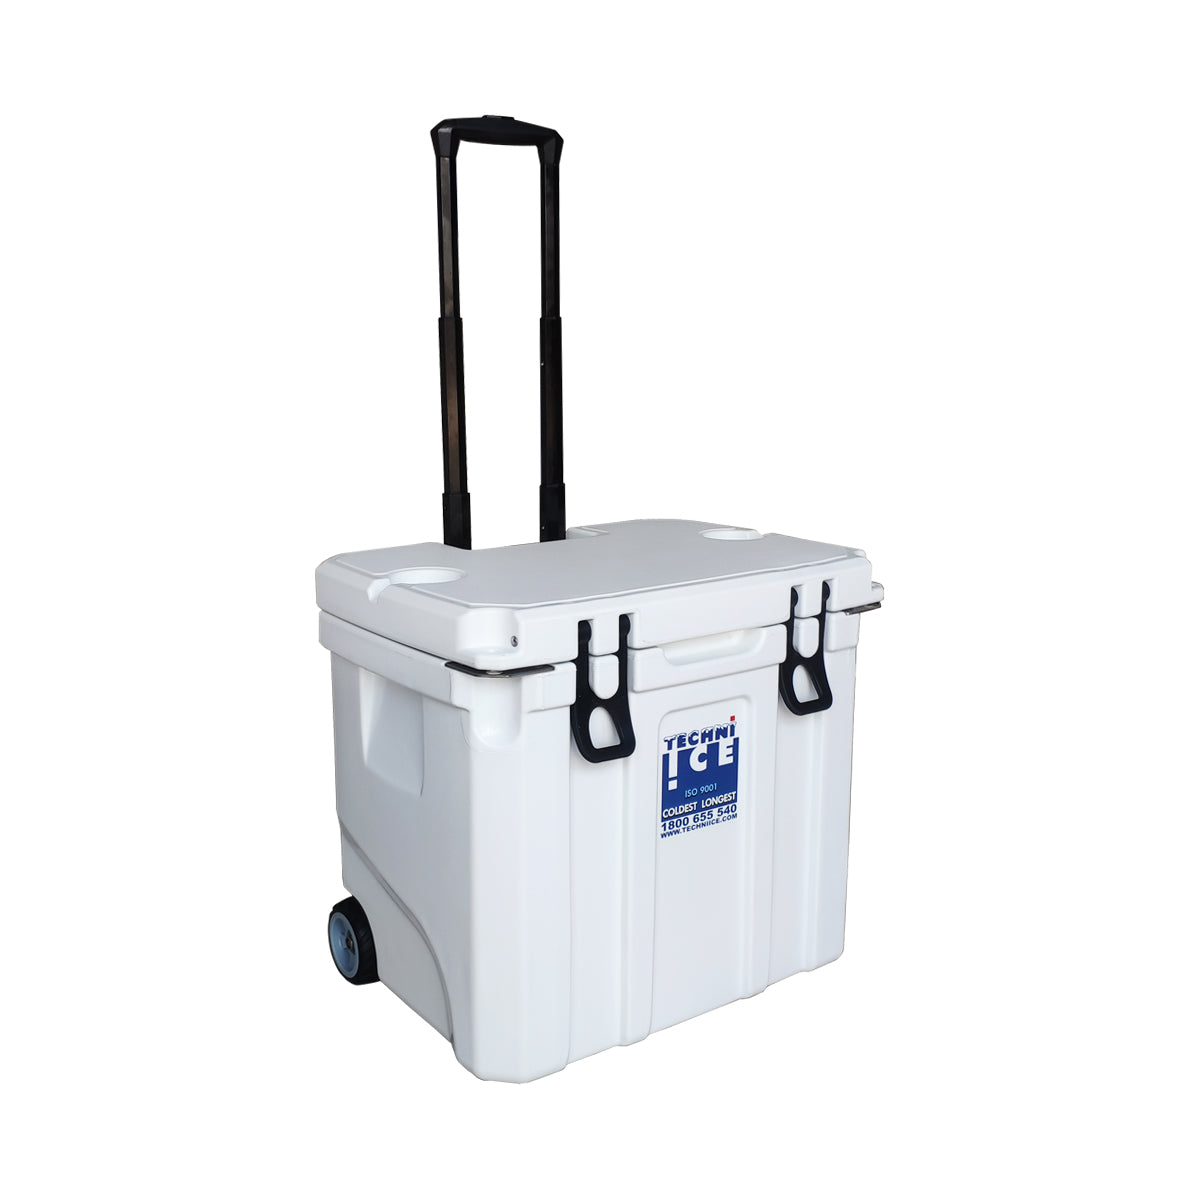 Techni Ice Signature Hybrid Premium Ice Box 35L White with Wheels & Telescopic Travel Handle *PREORDER FOR JUNE DISPATCH *FREE 6 REUSABLE DRY ICE PACKS VALUES $32.95